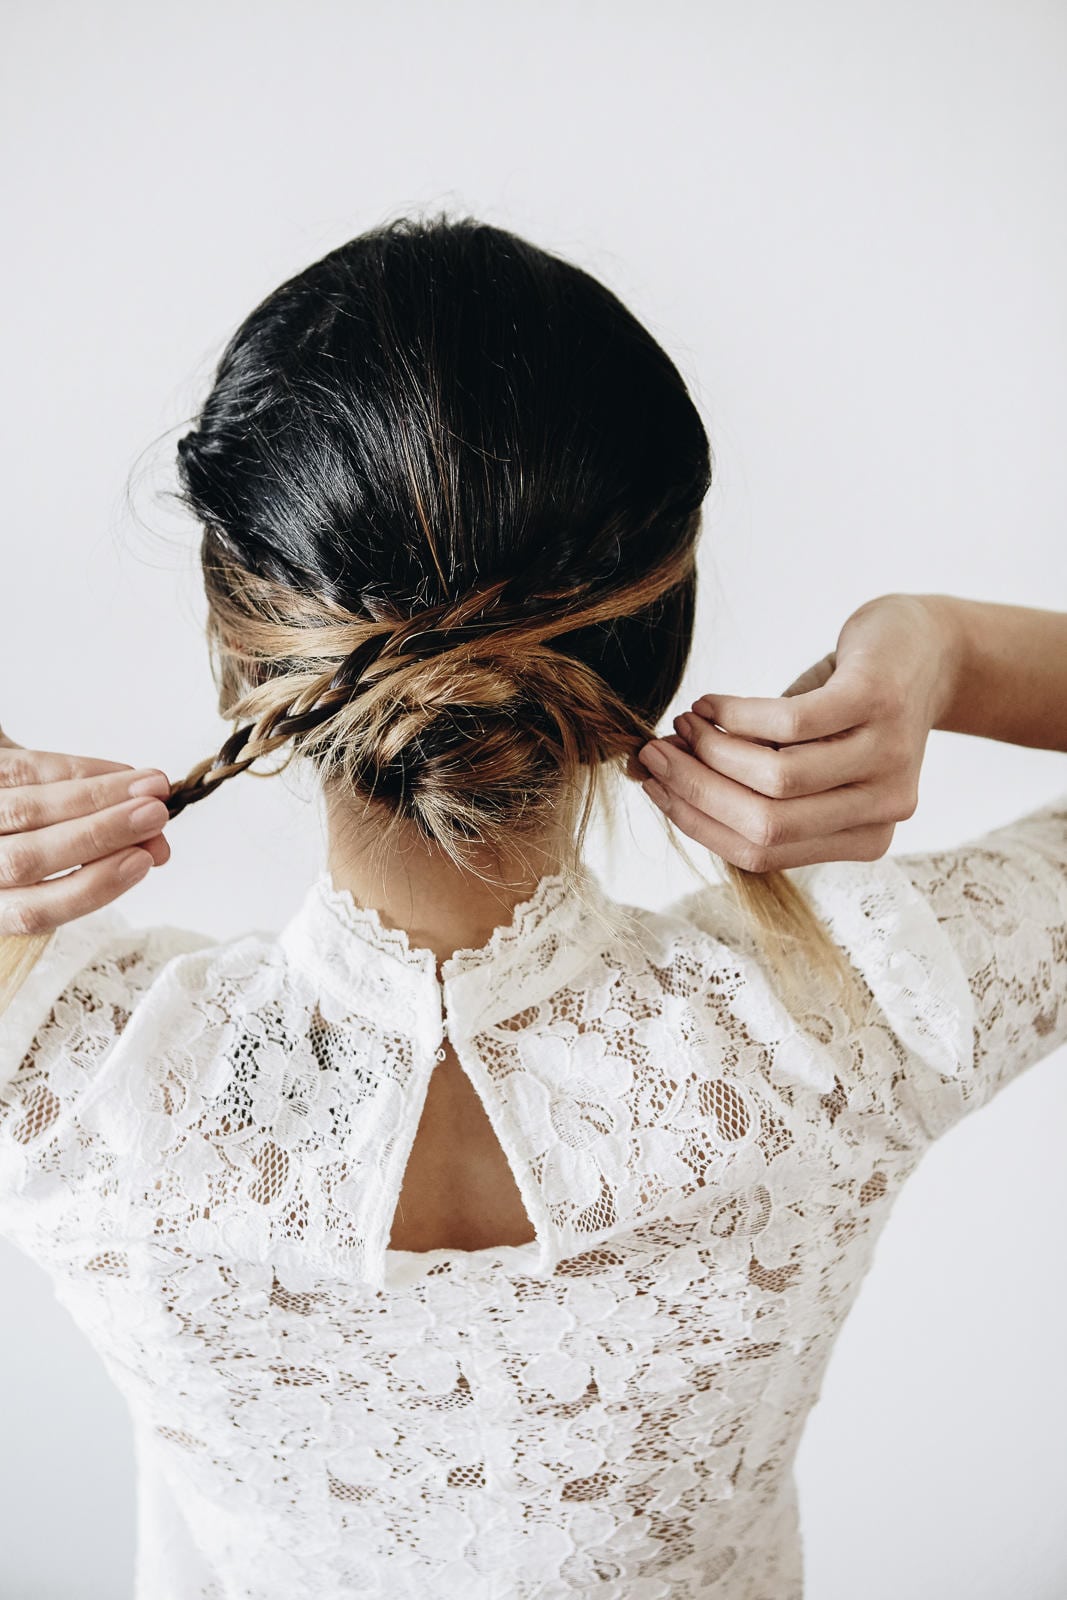 3 easy hairstyles - Messy Braided Bun |The Girl From Panama